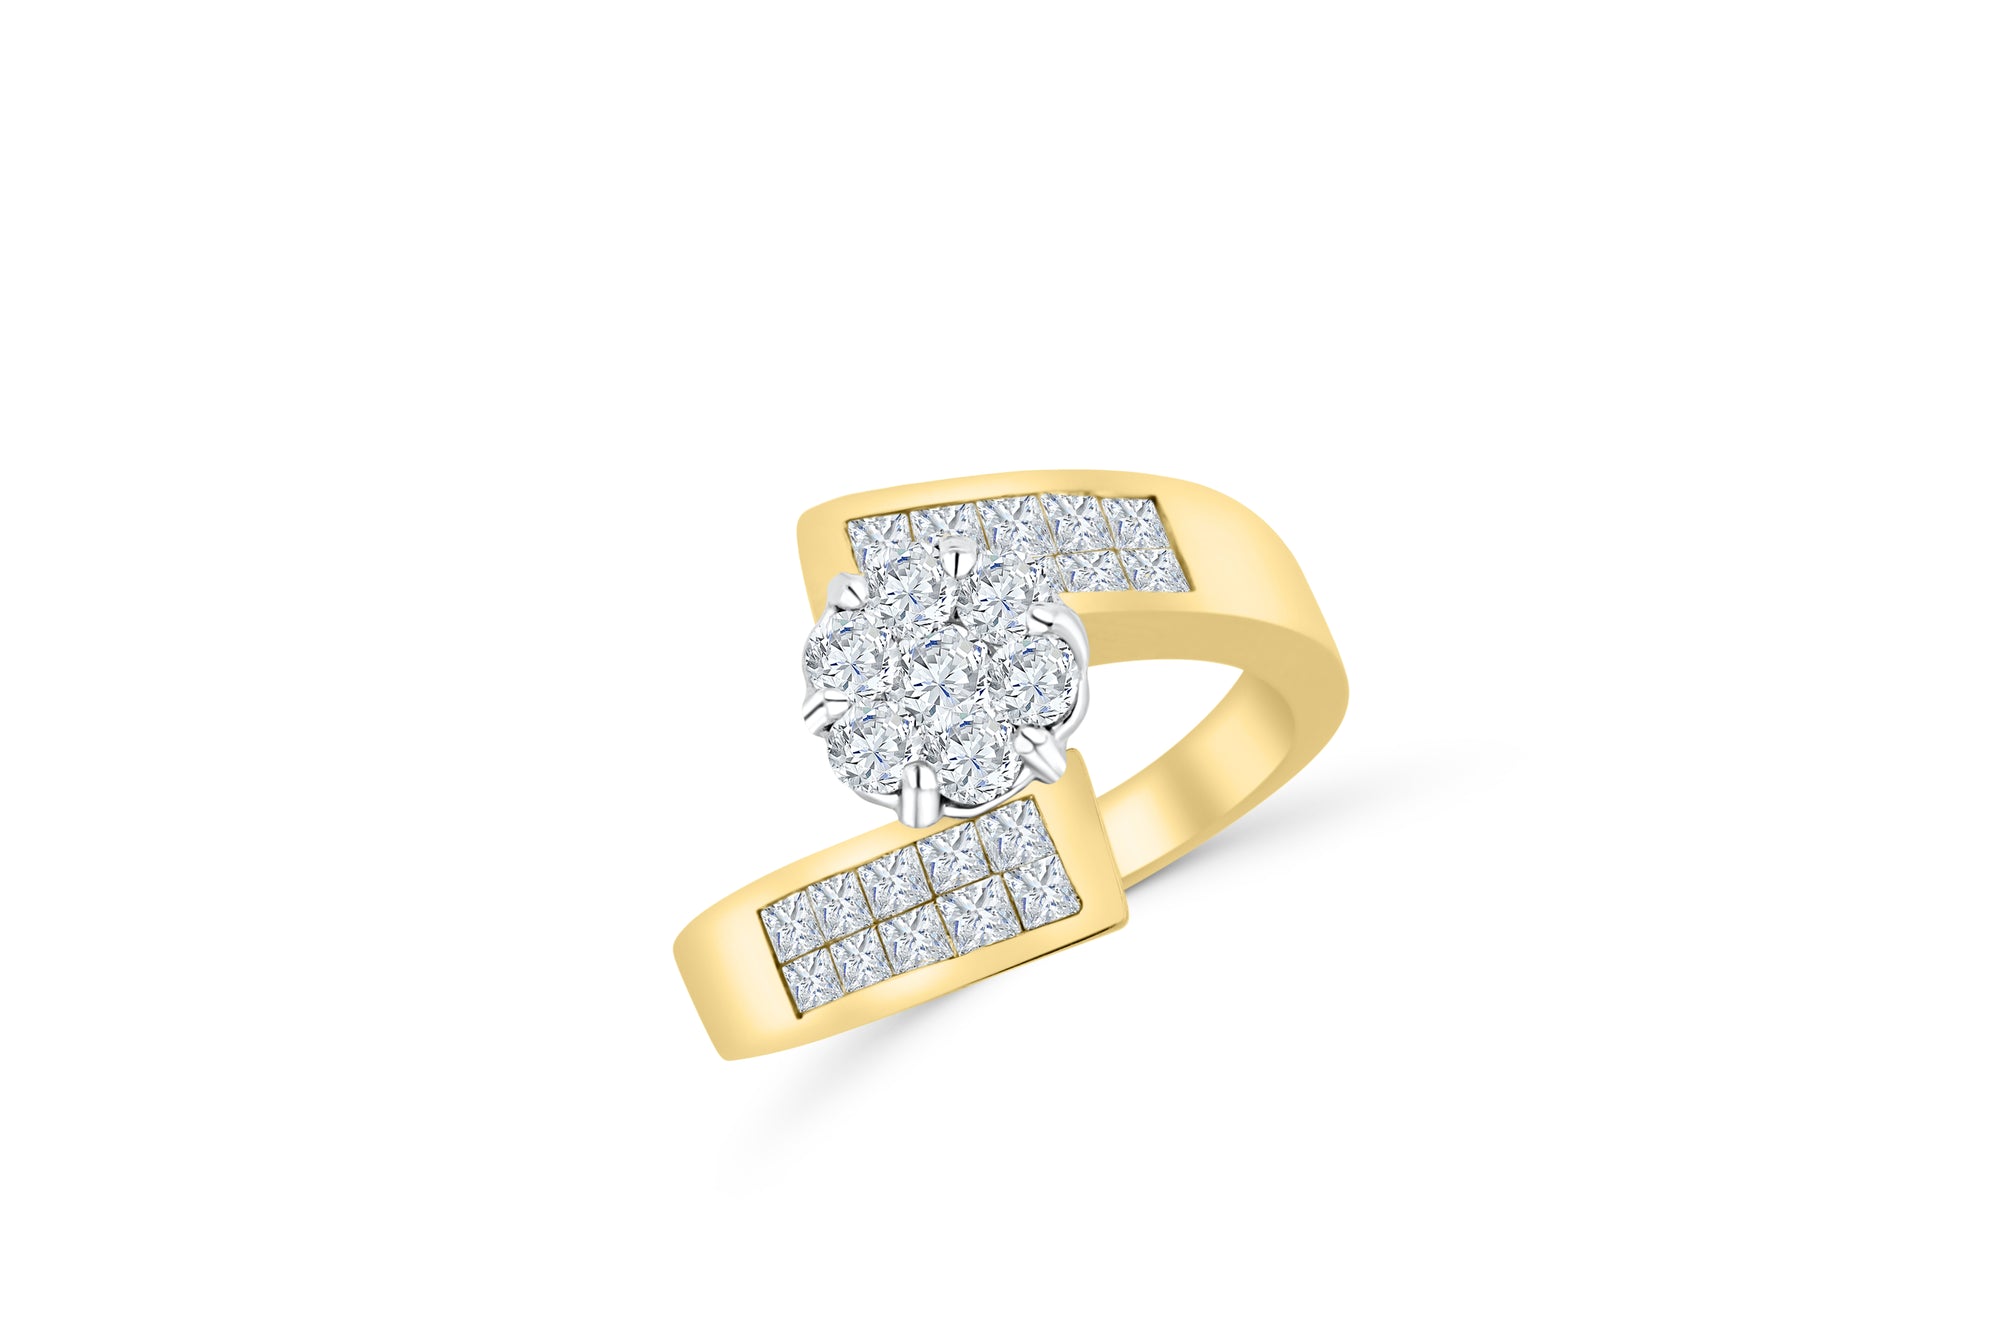 Cluster Diamond Engagement Ring 2.25 CT TW 14K Yellow Gold DENG023 - NorthandSouthJewelry